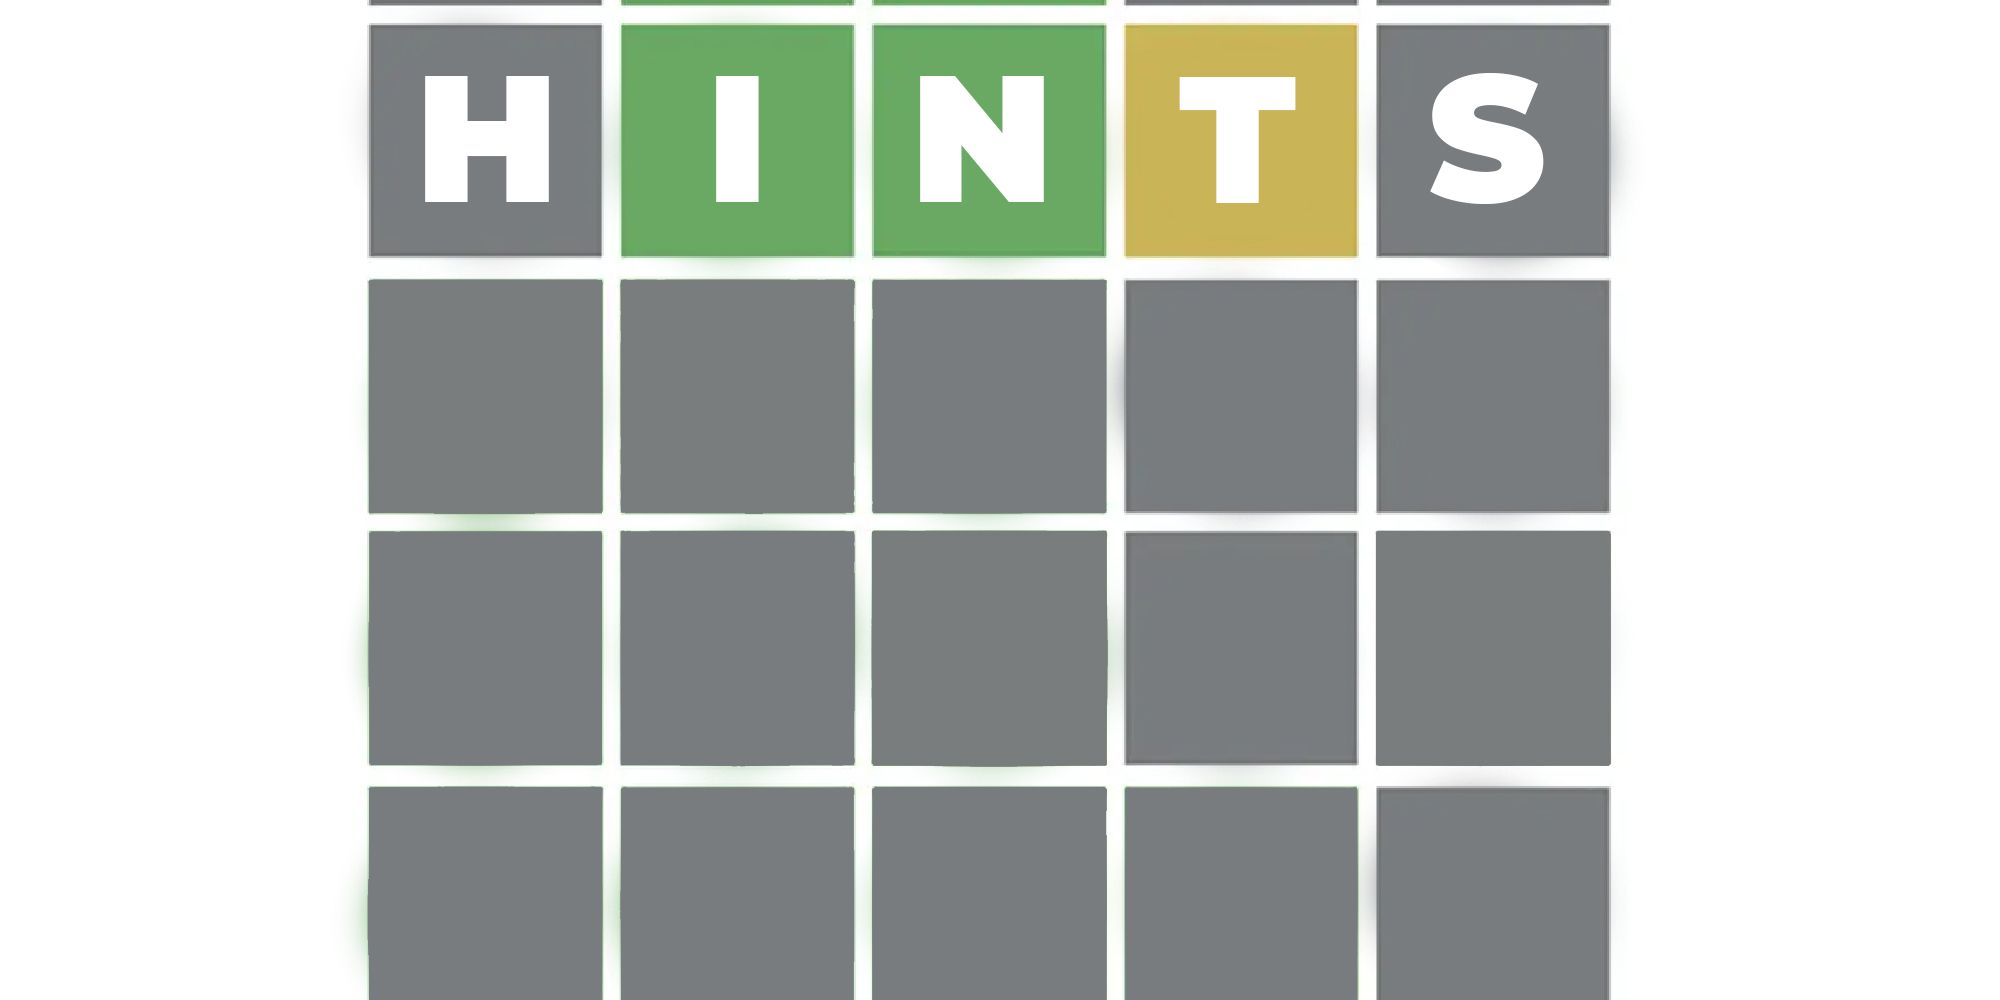 A Wordle grid labeled 'Hints'.